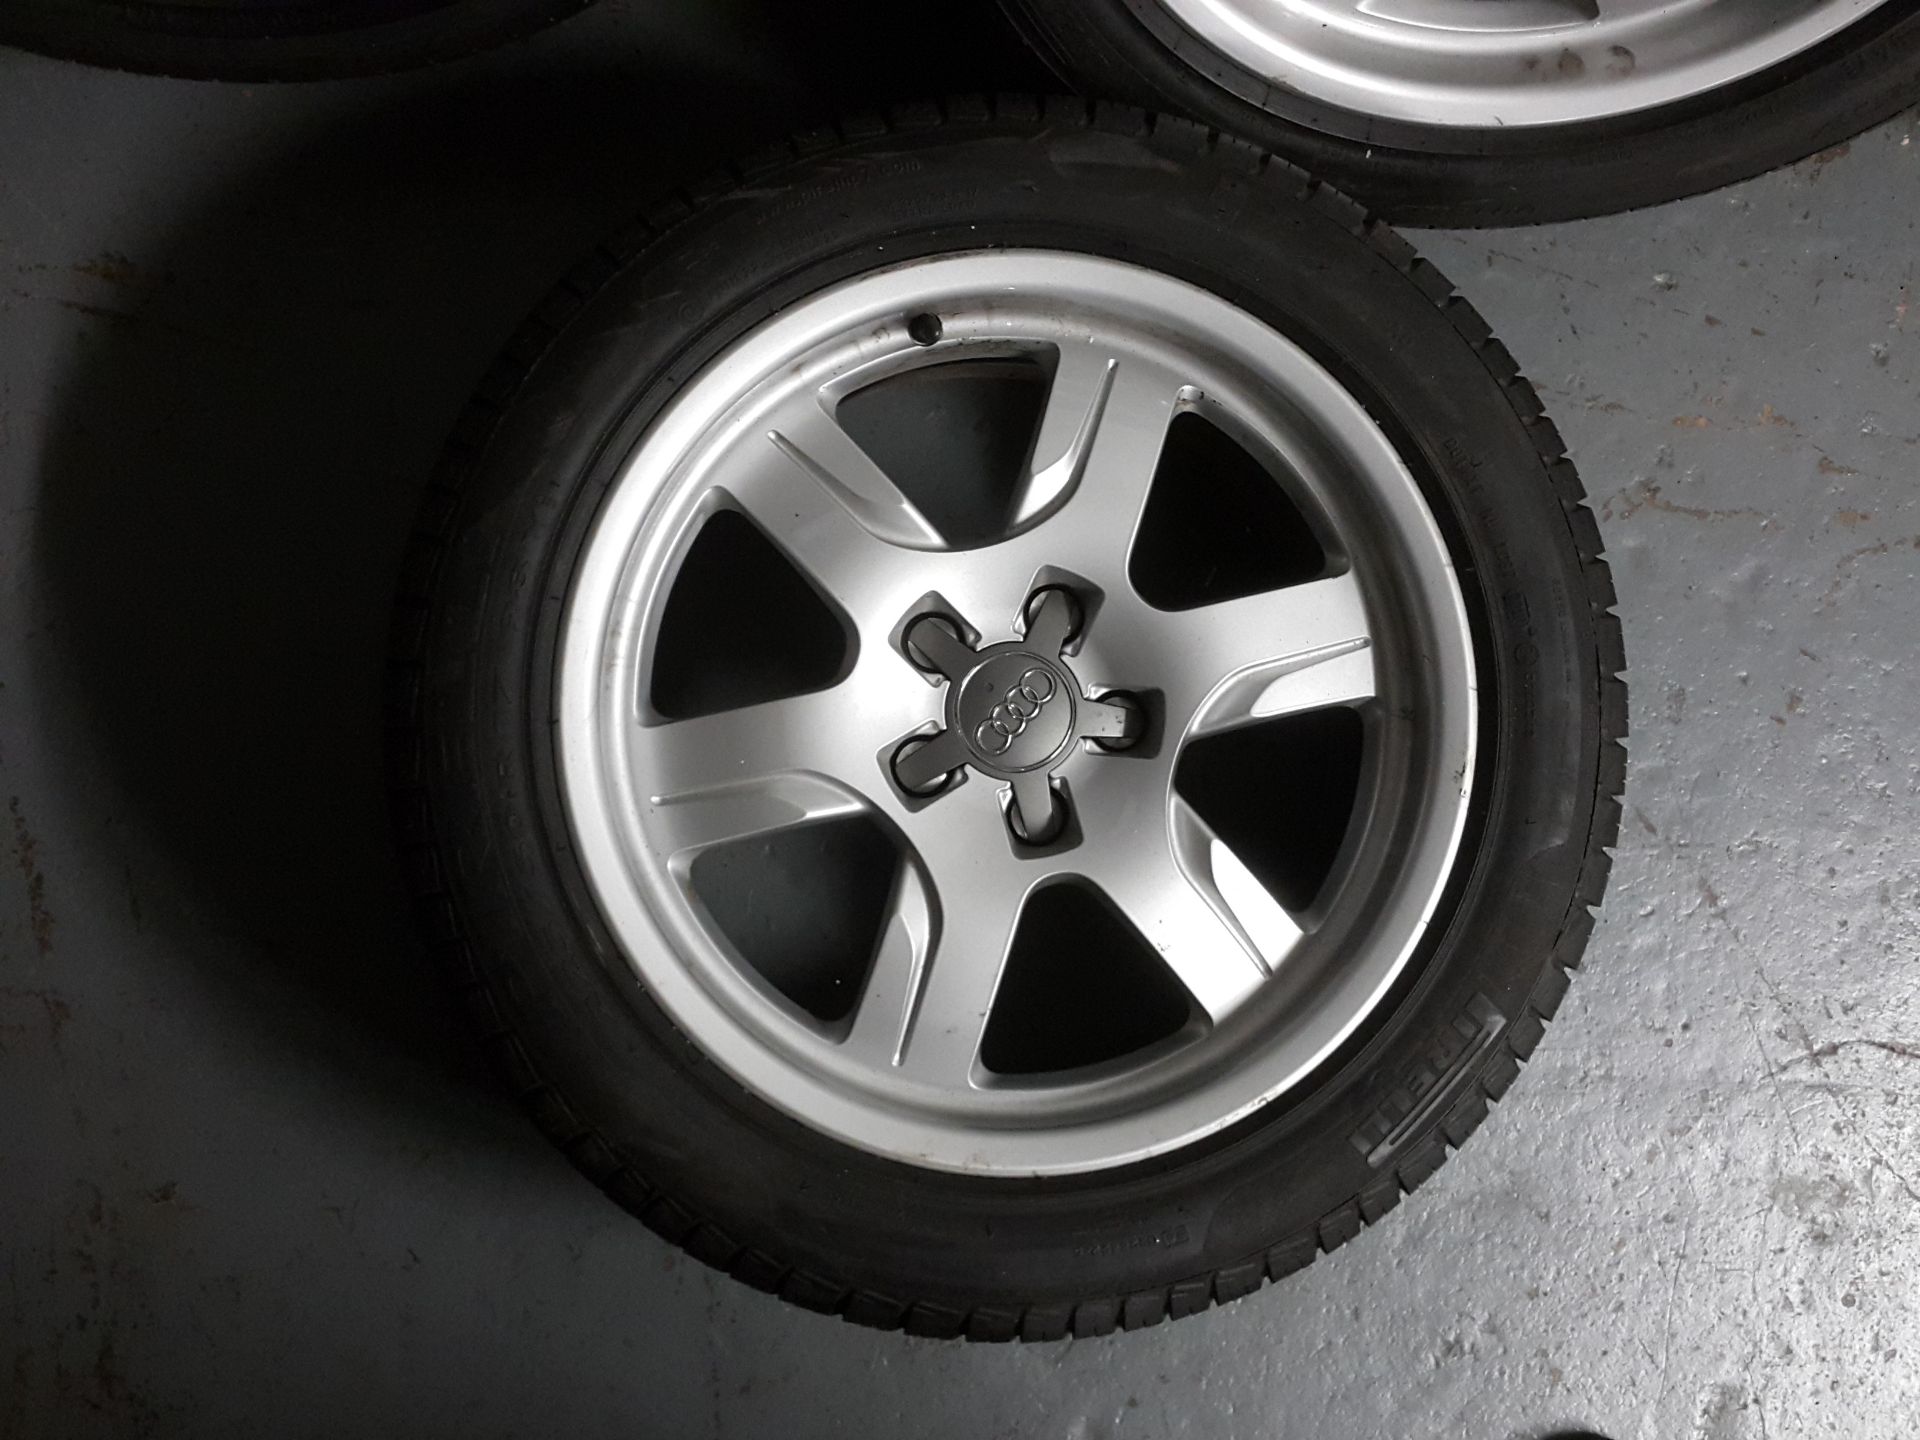 4 X AUDI A5 17" ALLOY WHEELS WITH PIRELLI CINTURATO TYRES 225/50/R17 - Image 8 of 9